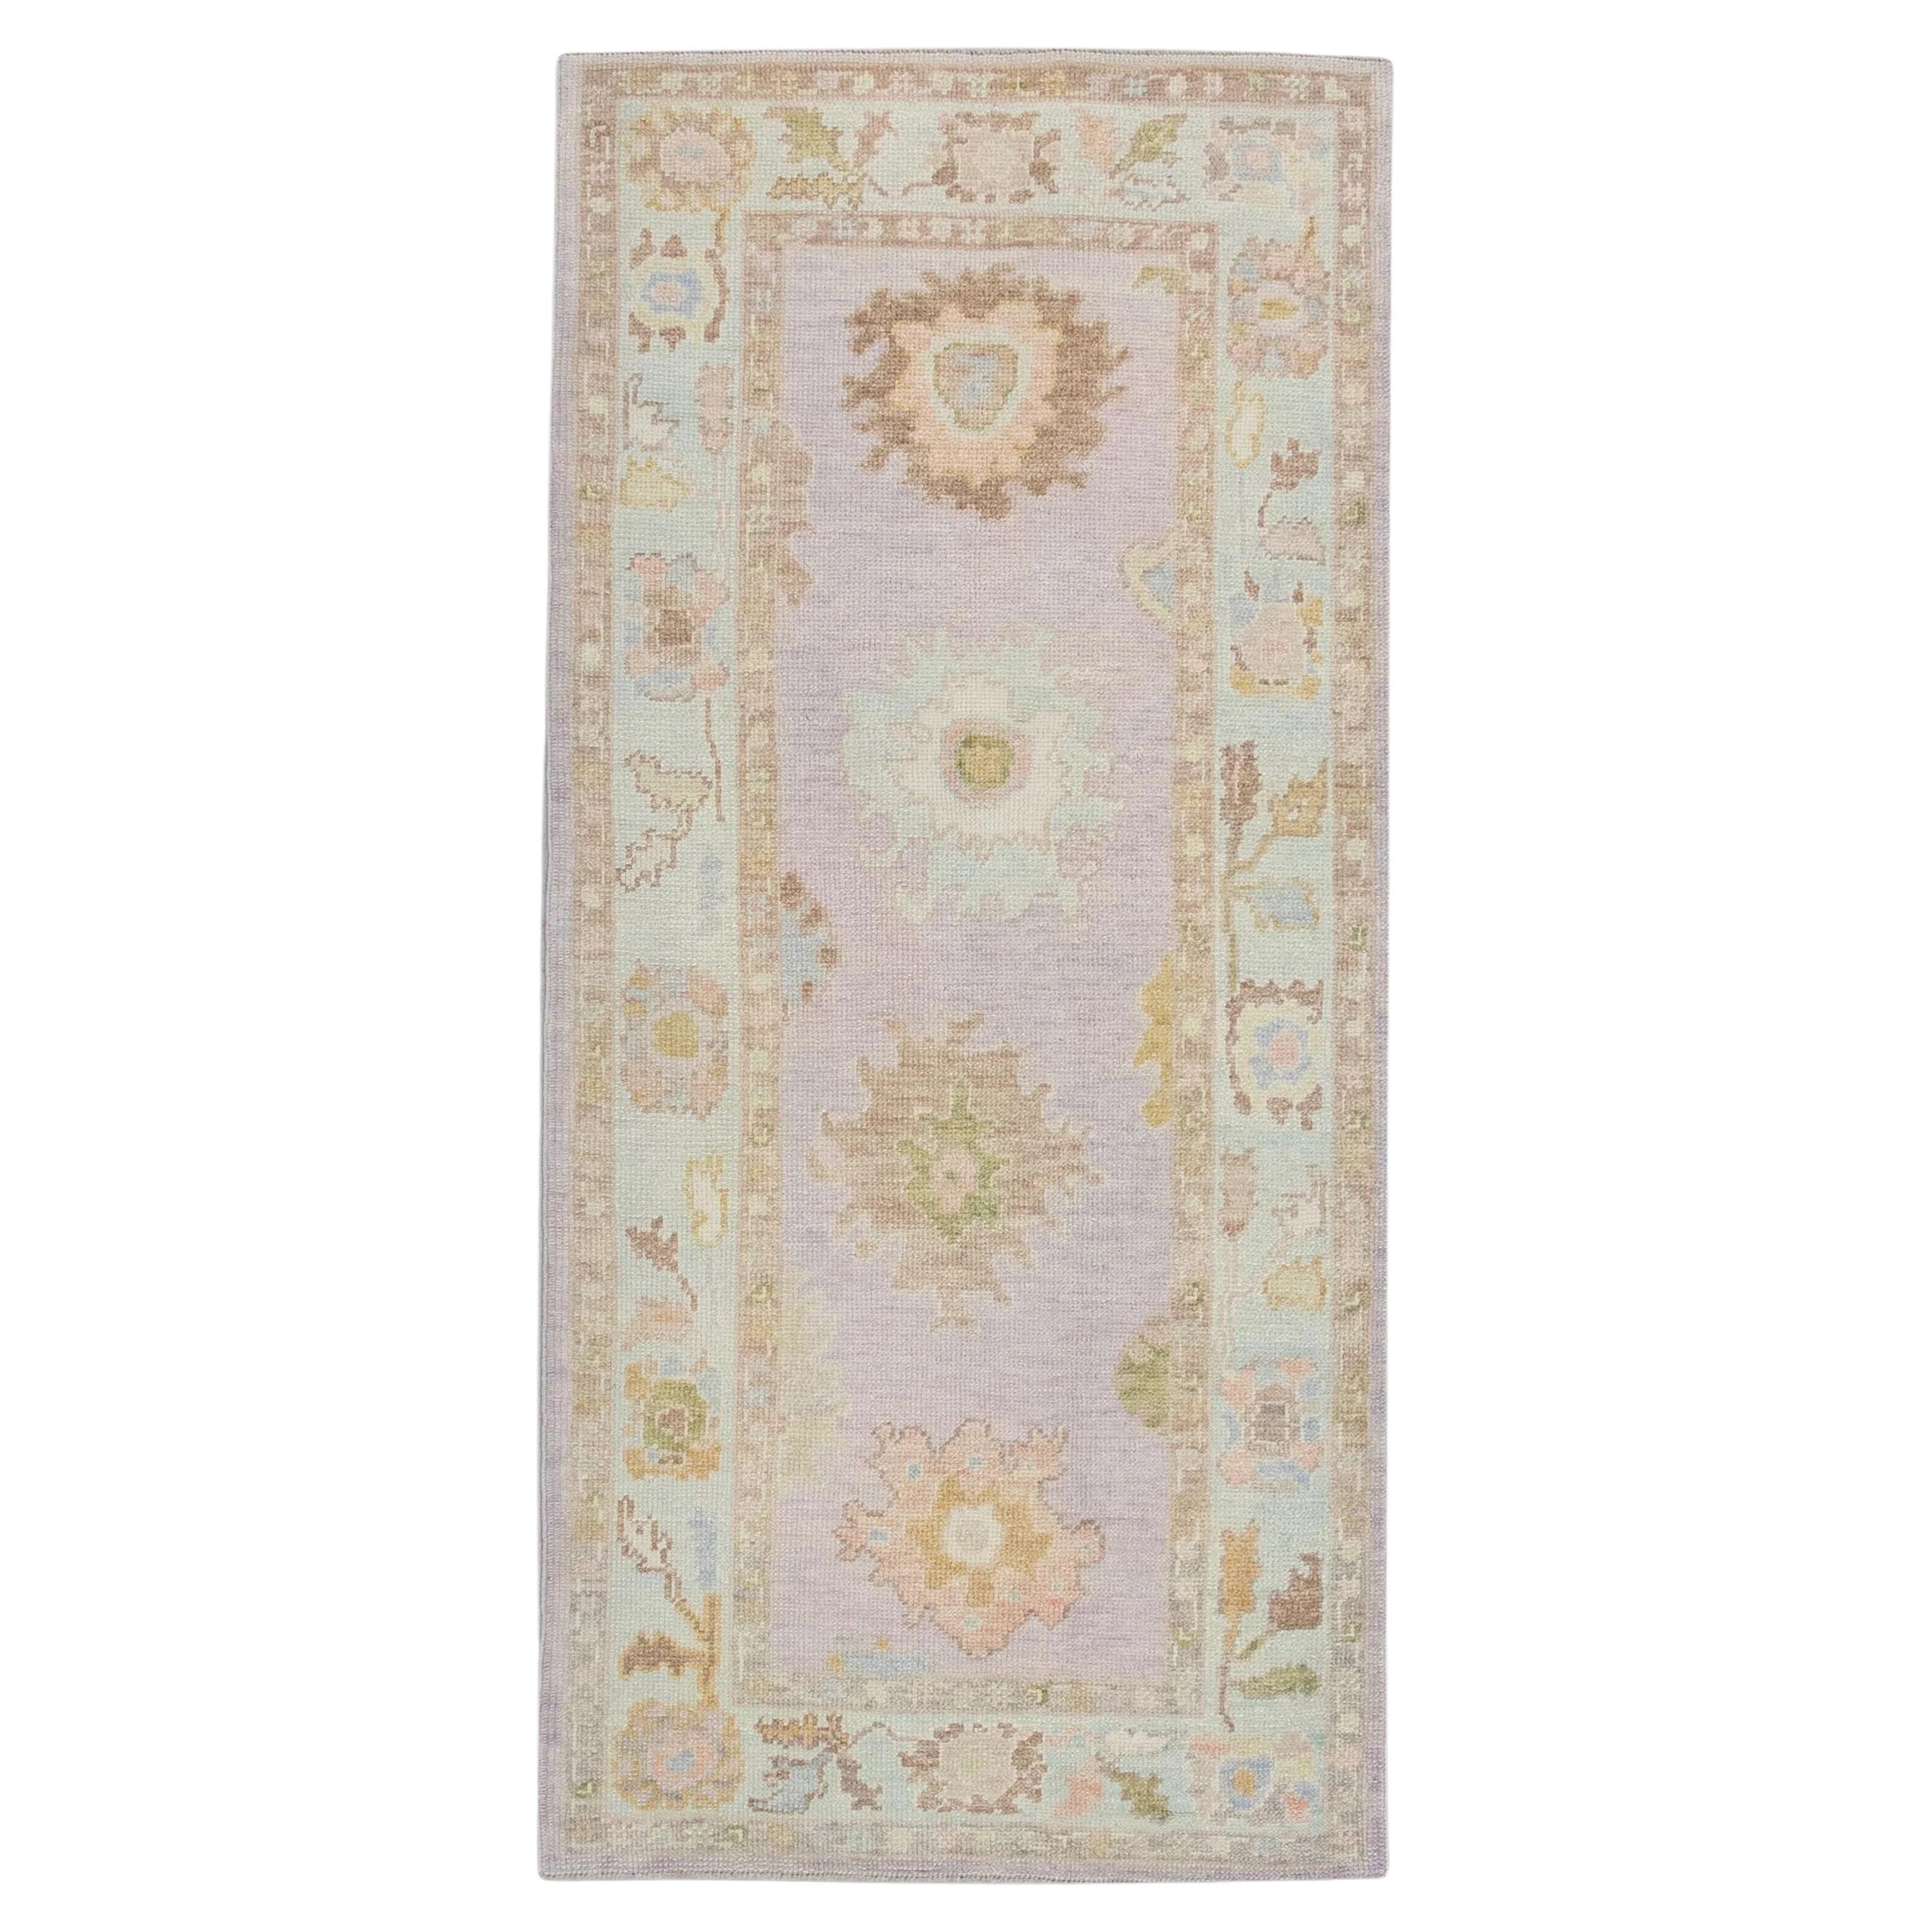 Handwoven Wool Turkish Oushak Rug with Colorful Floral Design 3'2'' x 6'4"